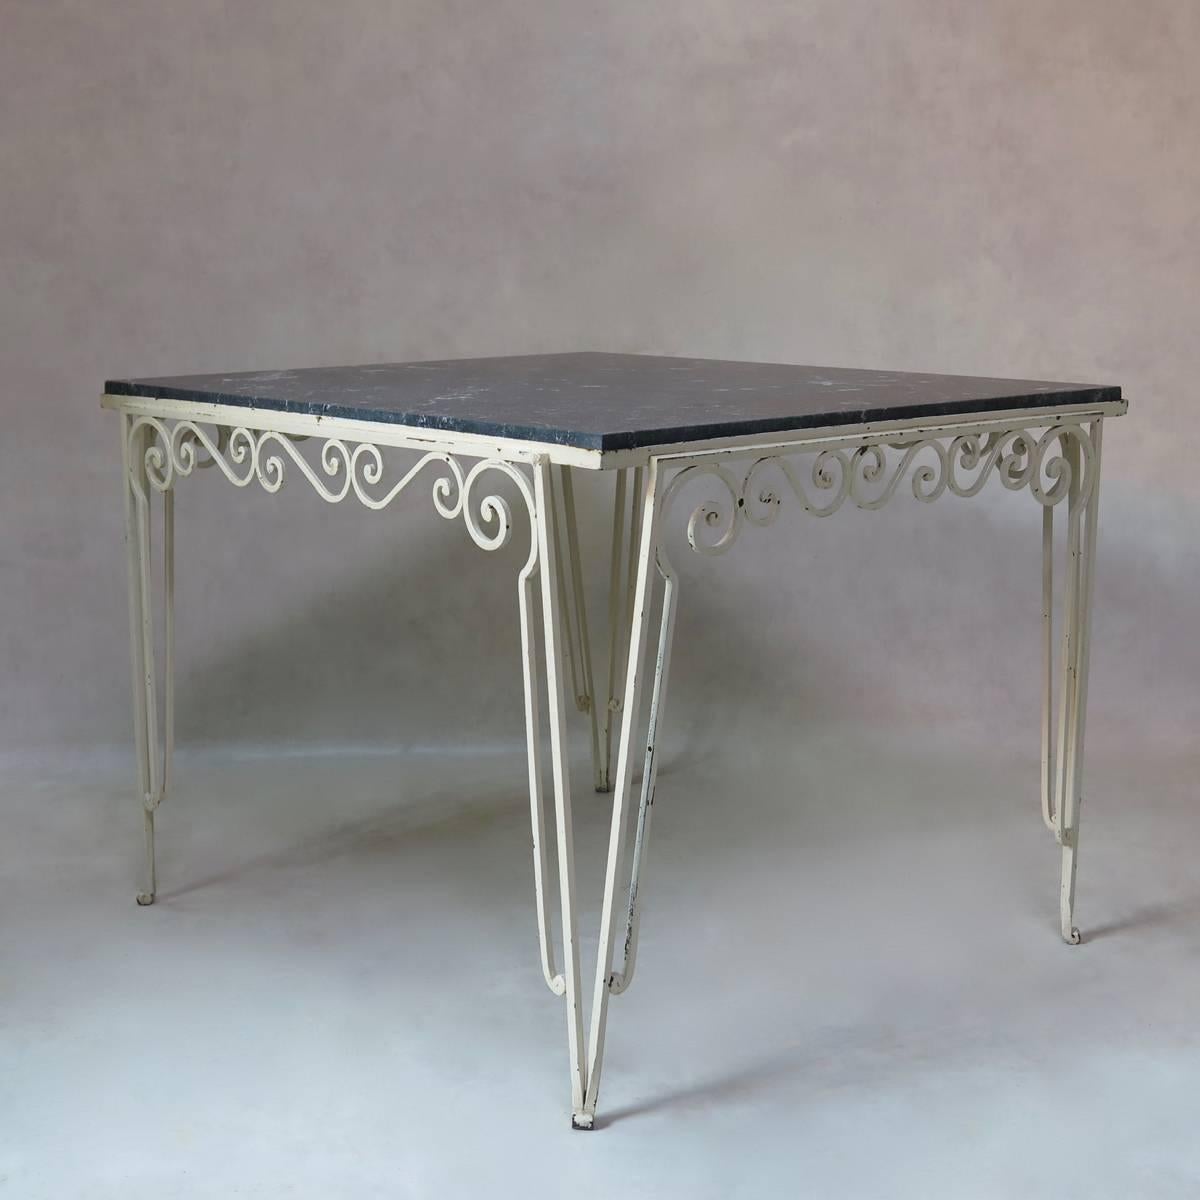 An unusual, large and almost square table with a painted wrought iron base and a mottled black and white stone top.